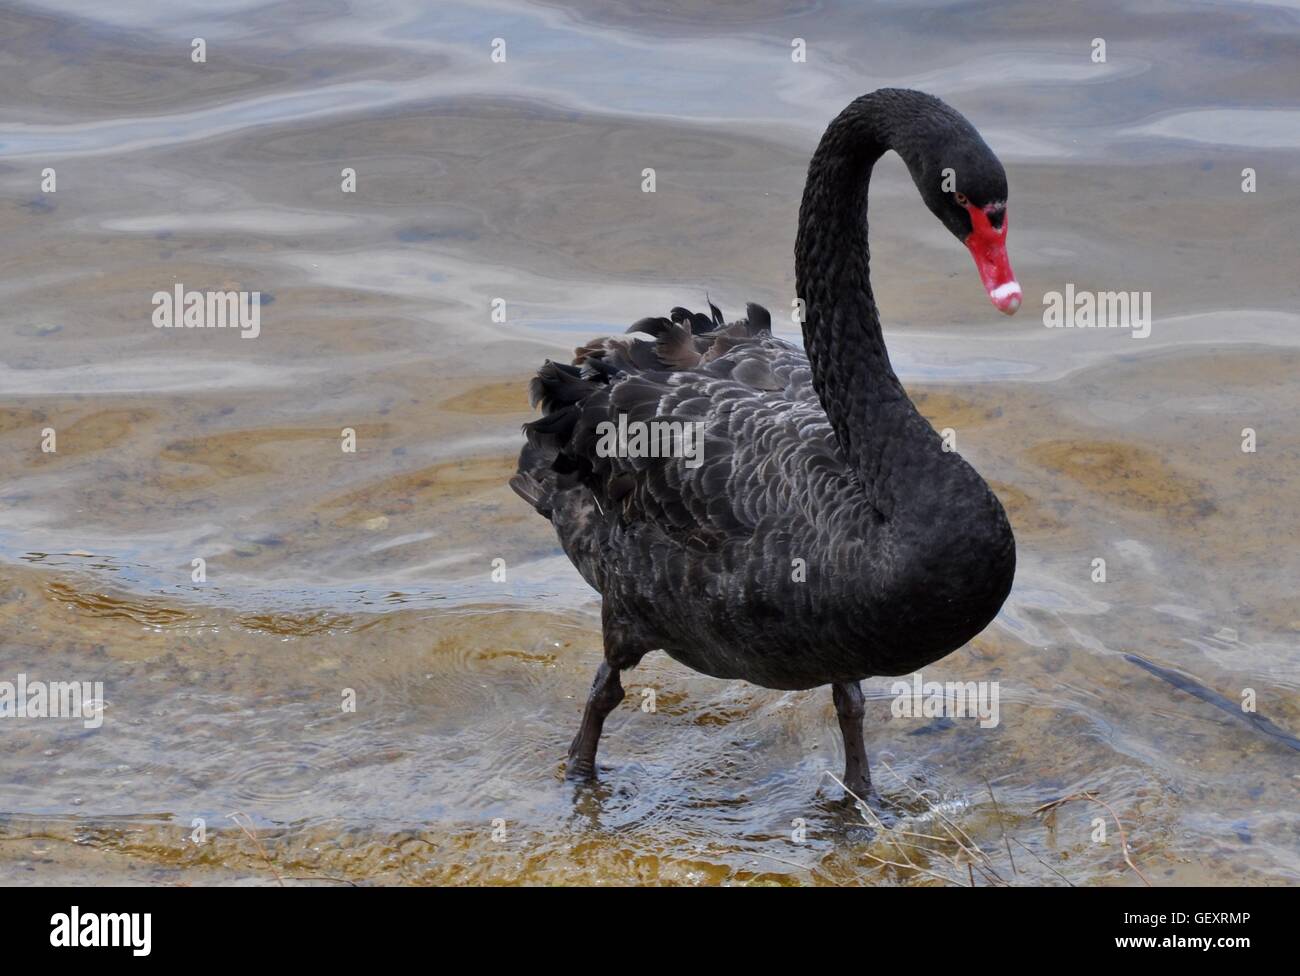 One black swan at the conservation reserve at Bibra Lake with red beak and webbed feet in Western Australia. Stock Photo